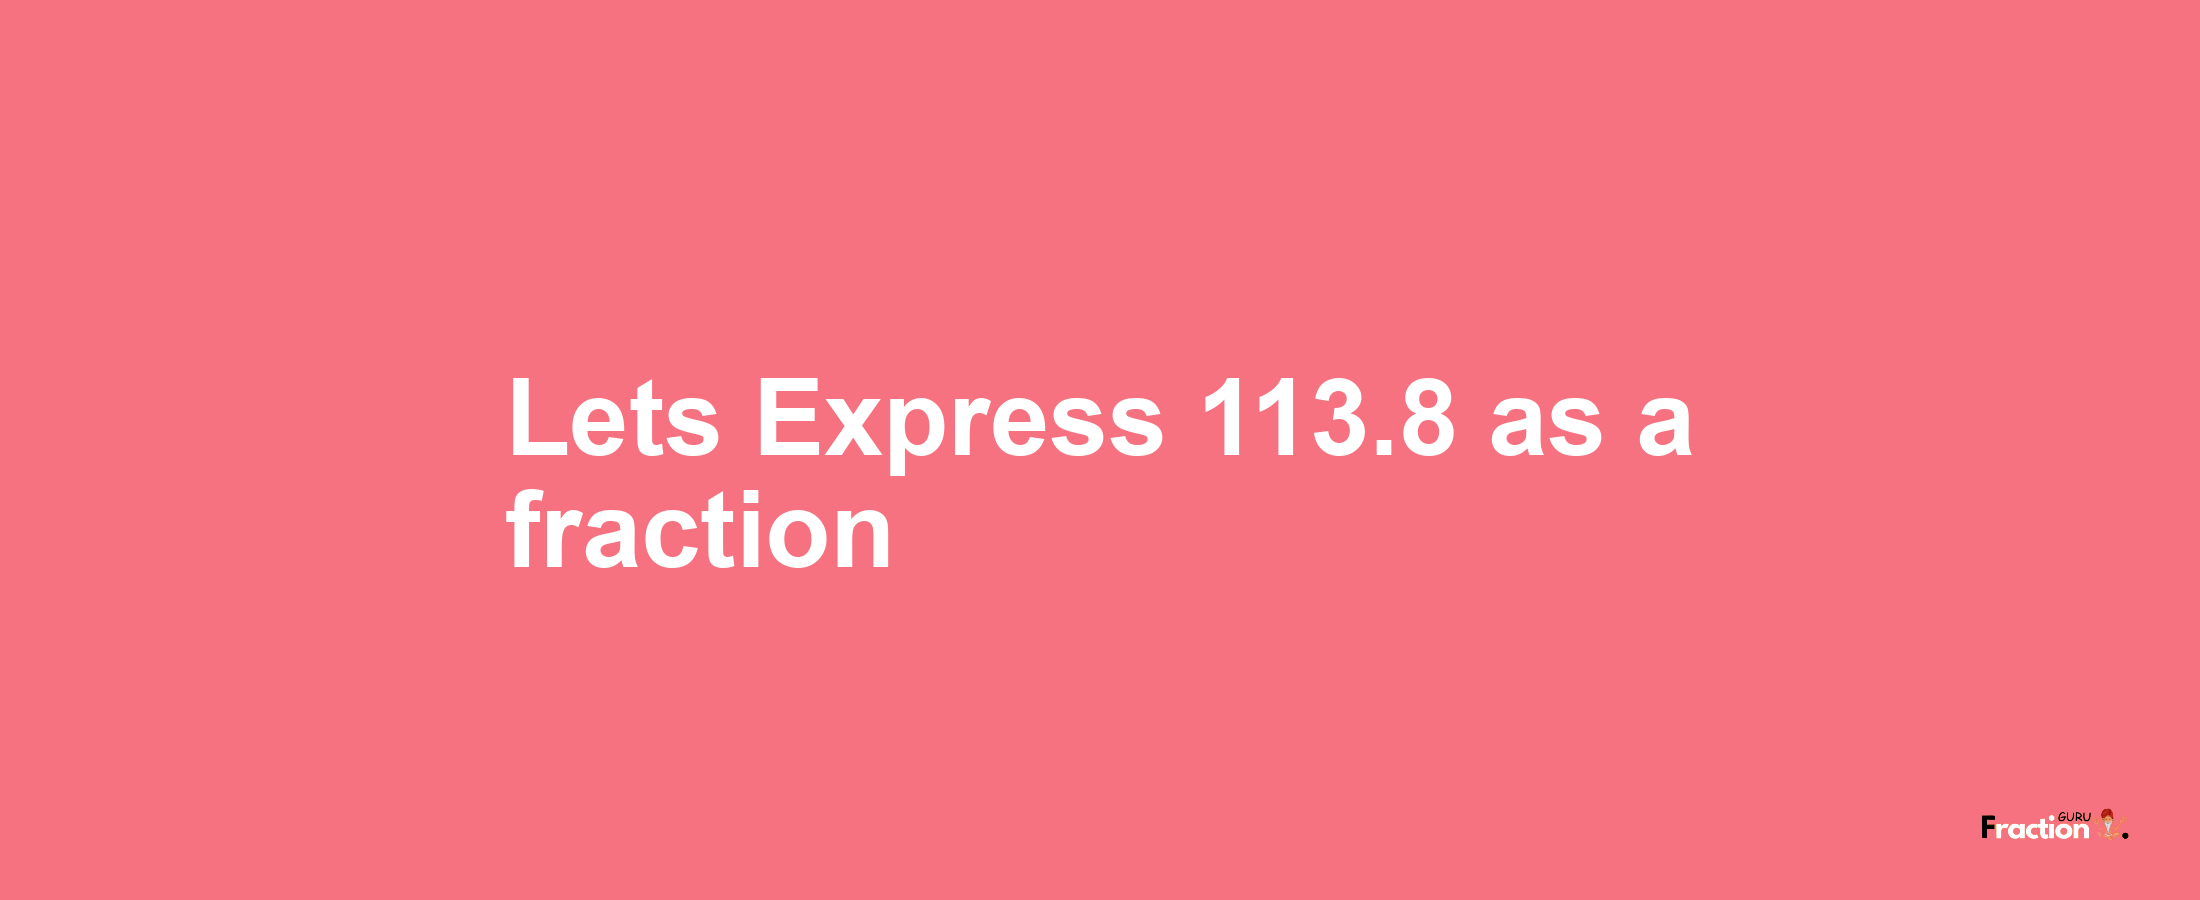 Lets Express 113.8 as afraction